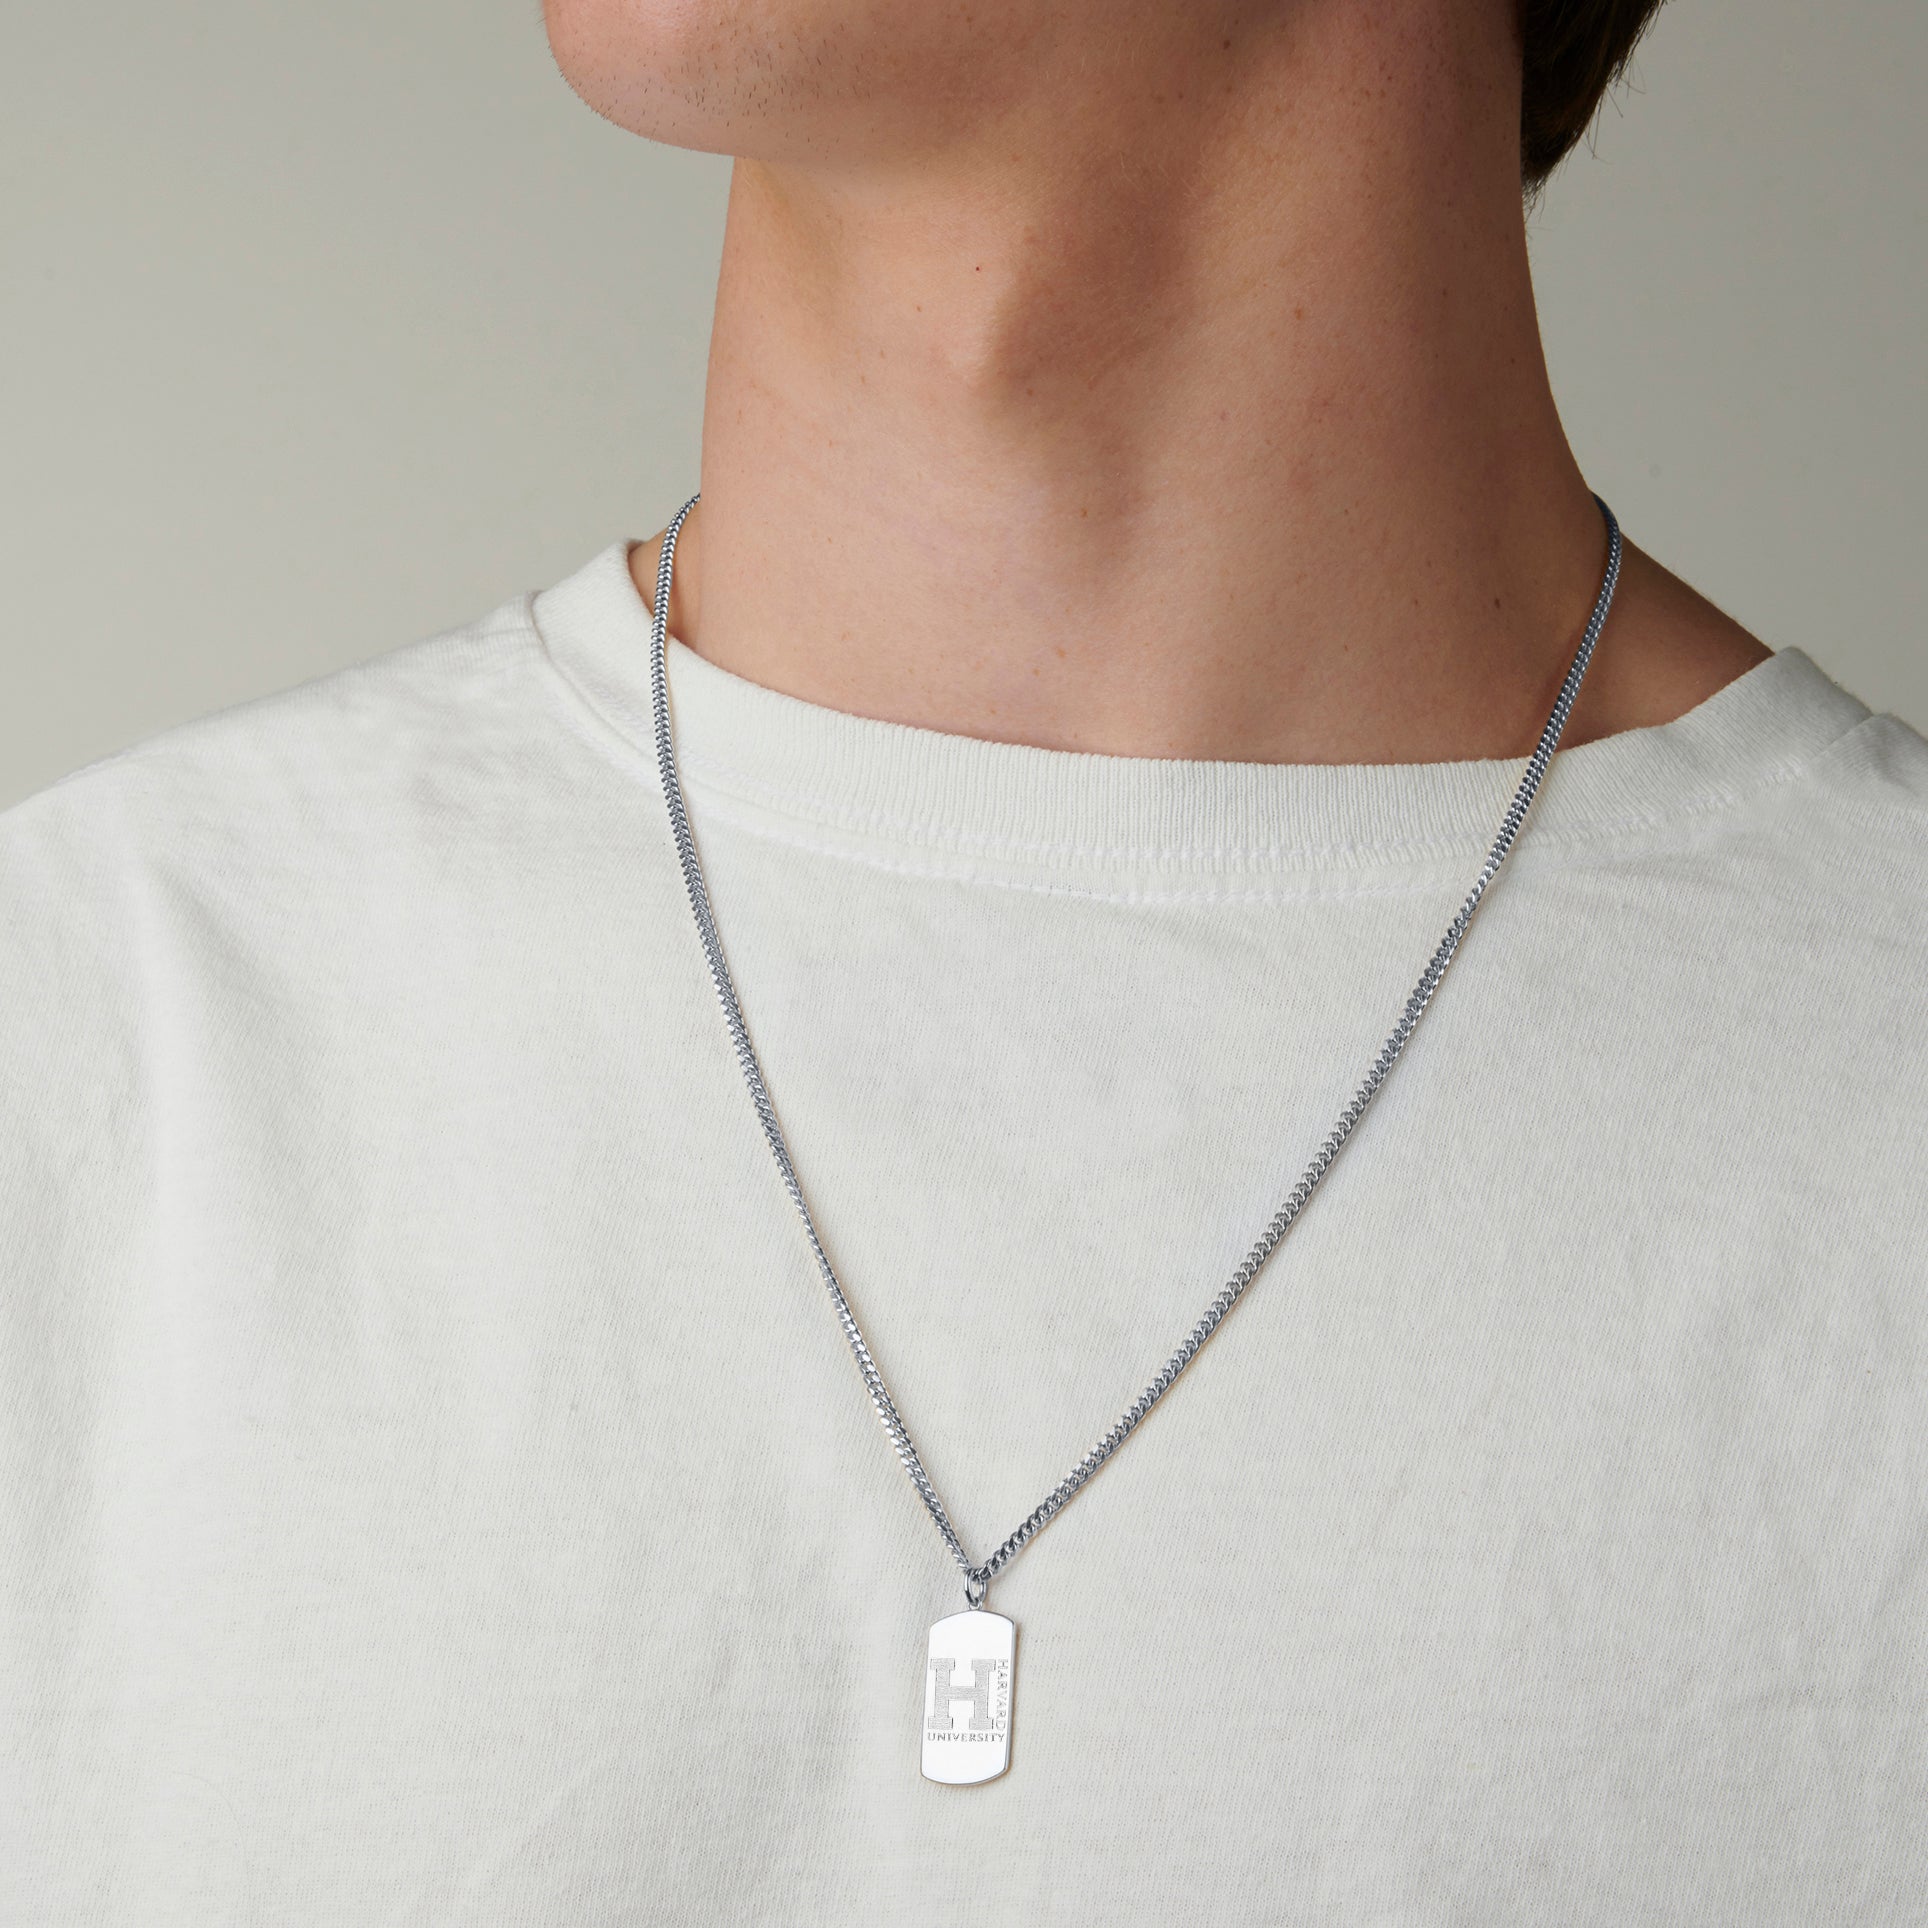 Man wearing Harvard Squadra Pendant in Sterling Silver: An elegant portrayal of a man wearing the Harvard Squadra Pendant in sterling silver, symbolizing his affiliation with Harvard University.